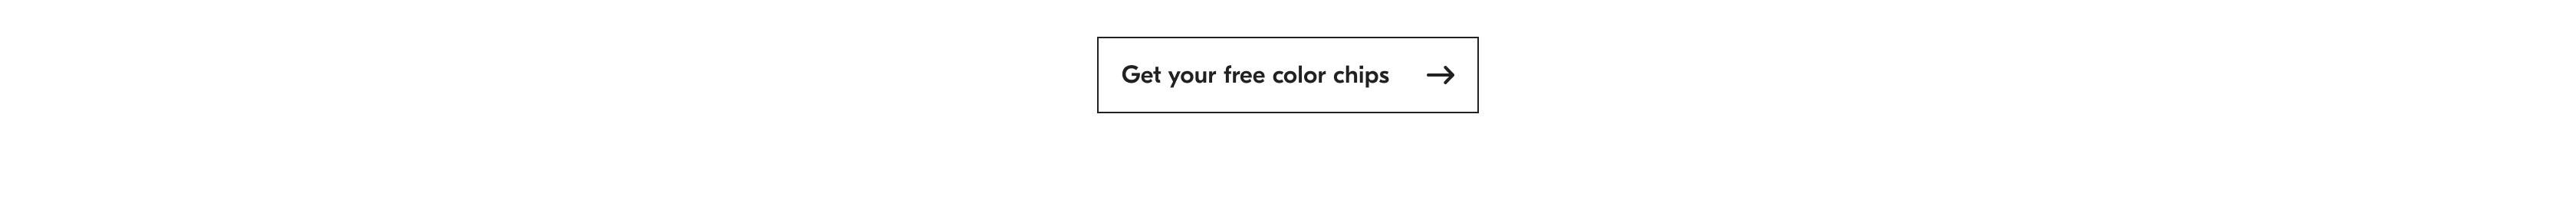 Get your free color chips